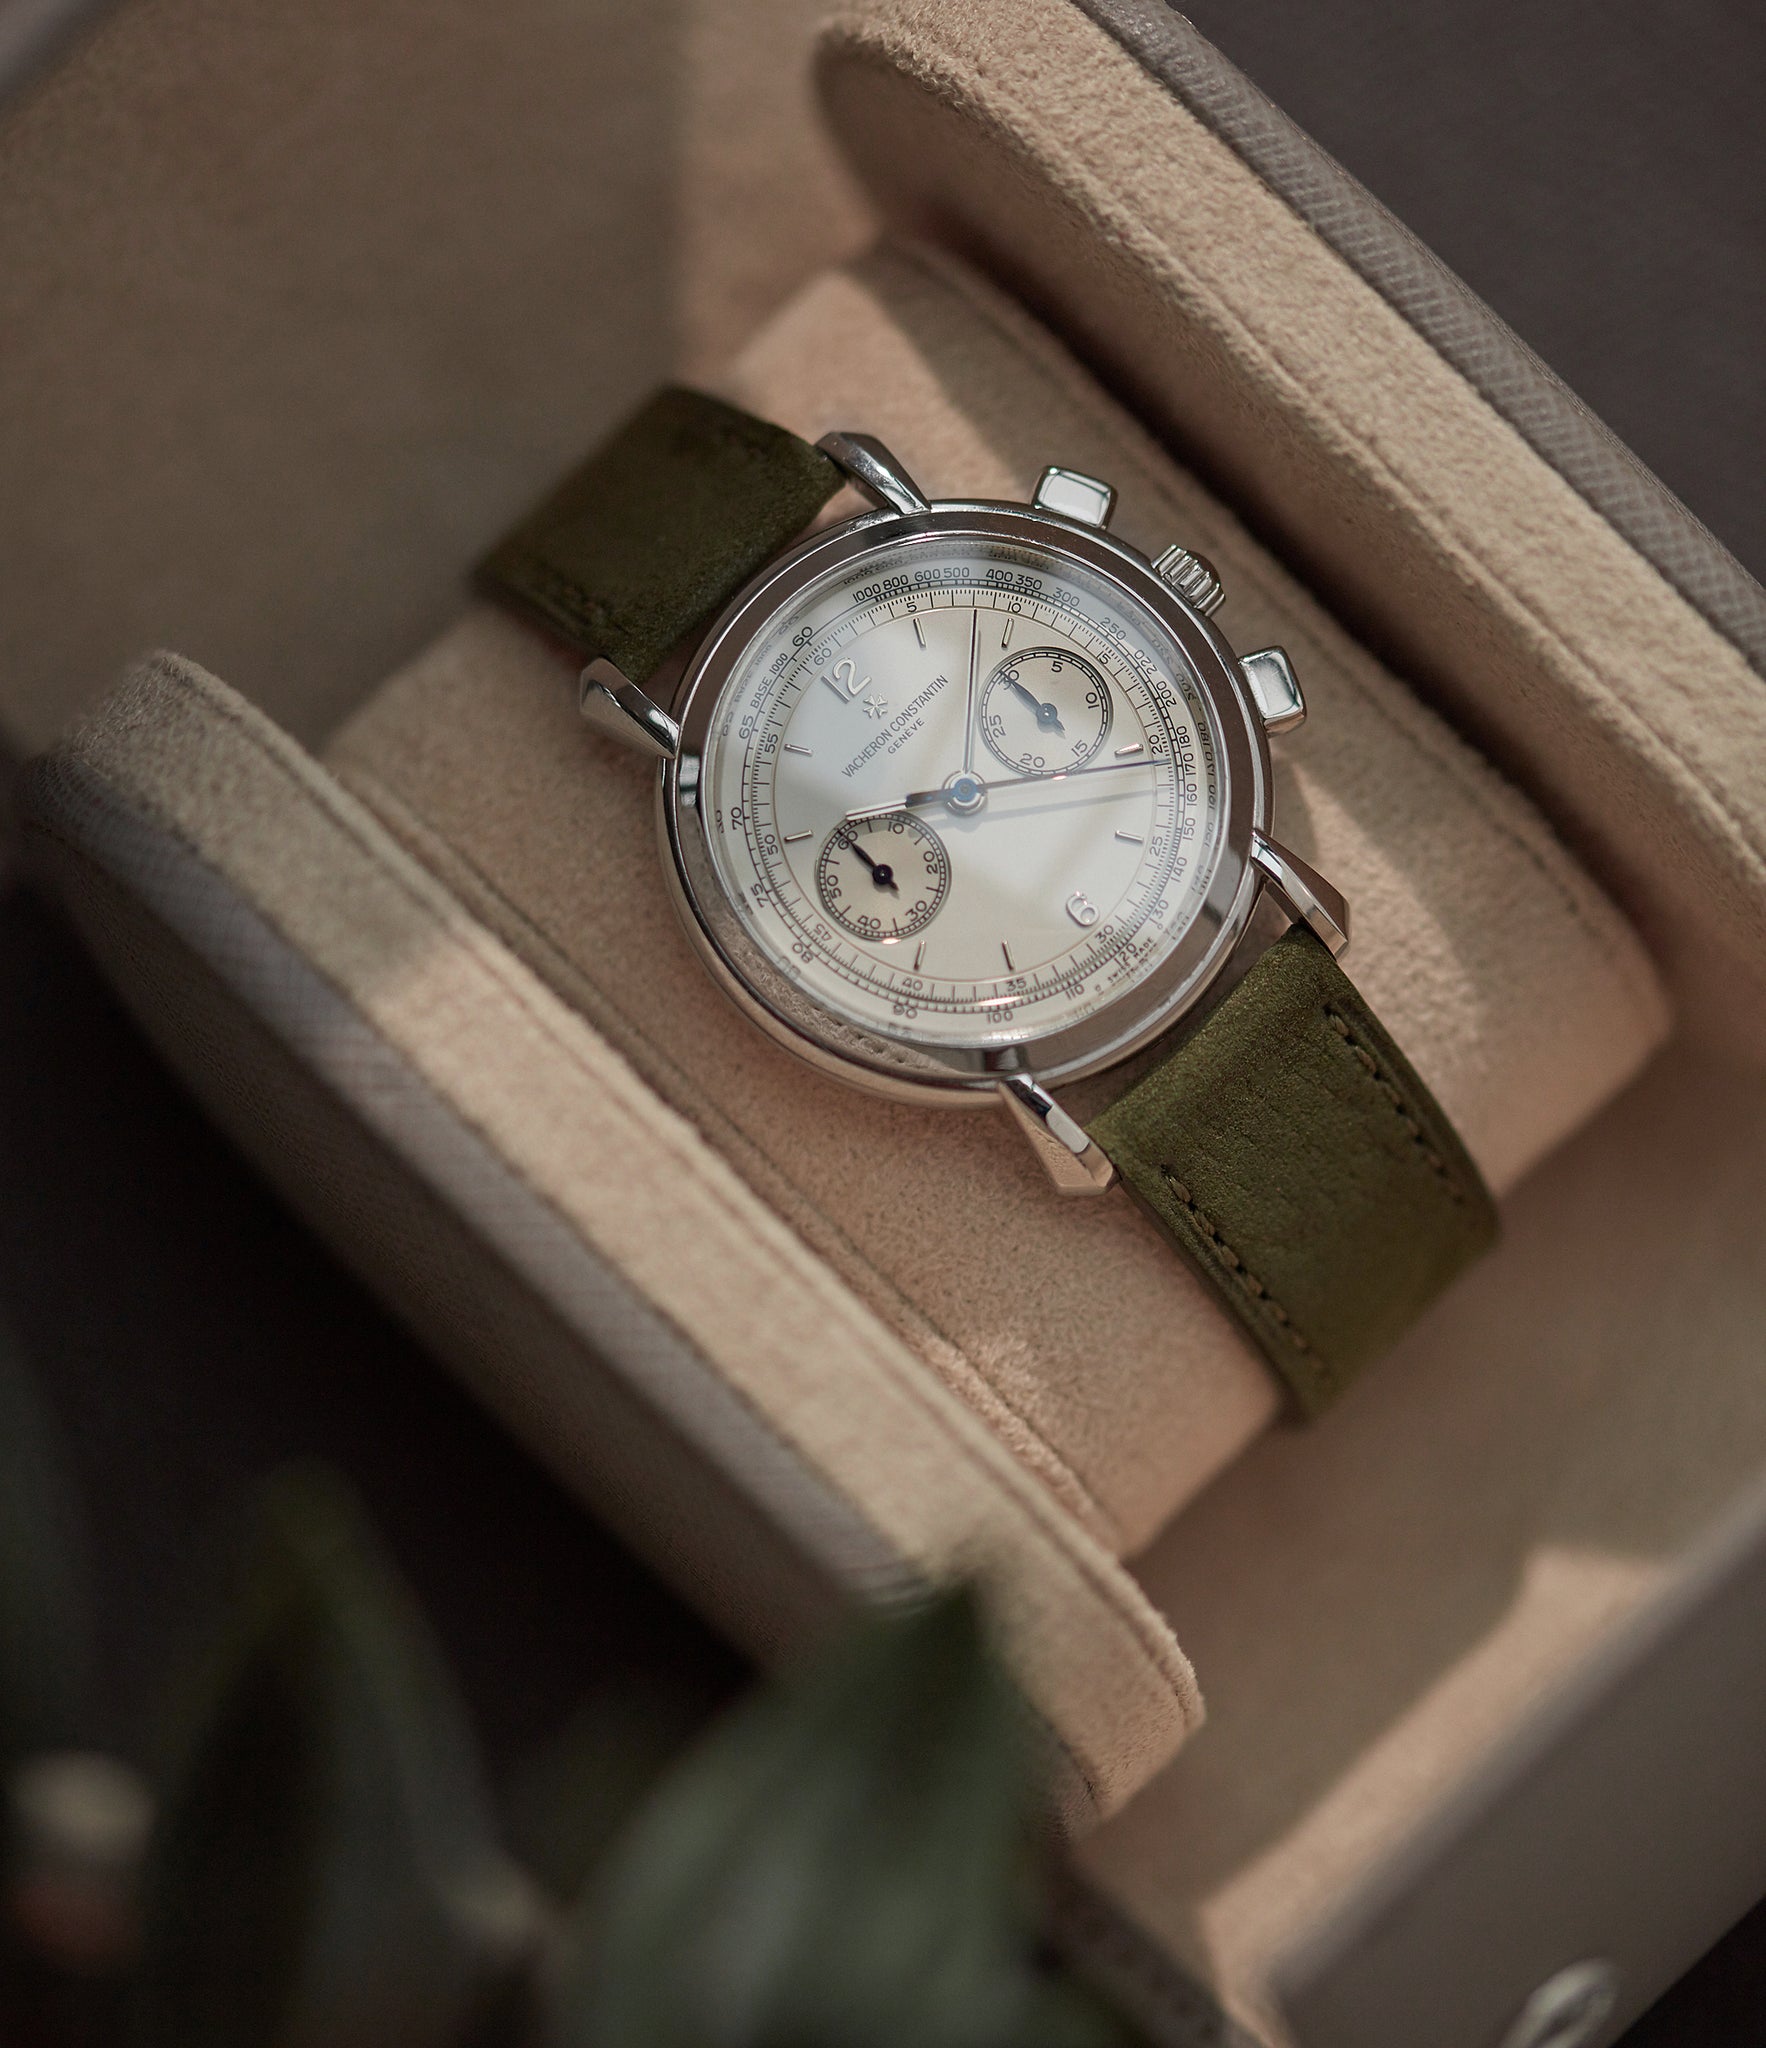 Shop Cape Town Molequin watch strap Vacheron Constantin khaki olive green nubuck leather quick-release springbars buckle handcrafted European-made for sale online at A Collected Man London